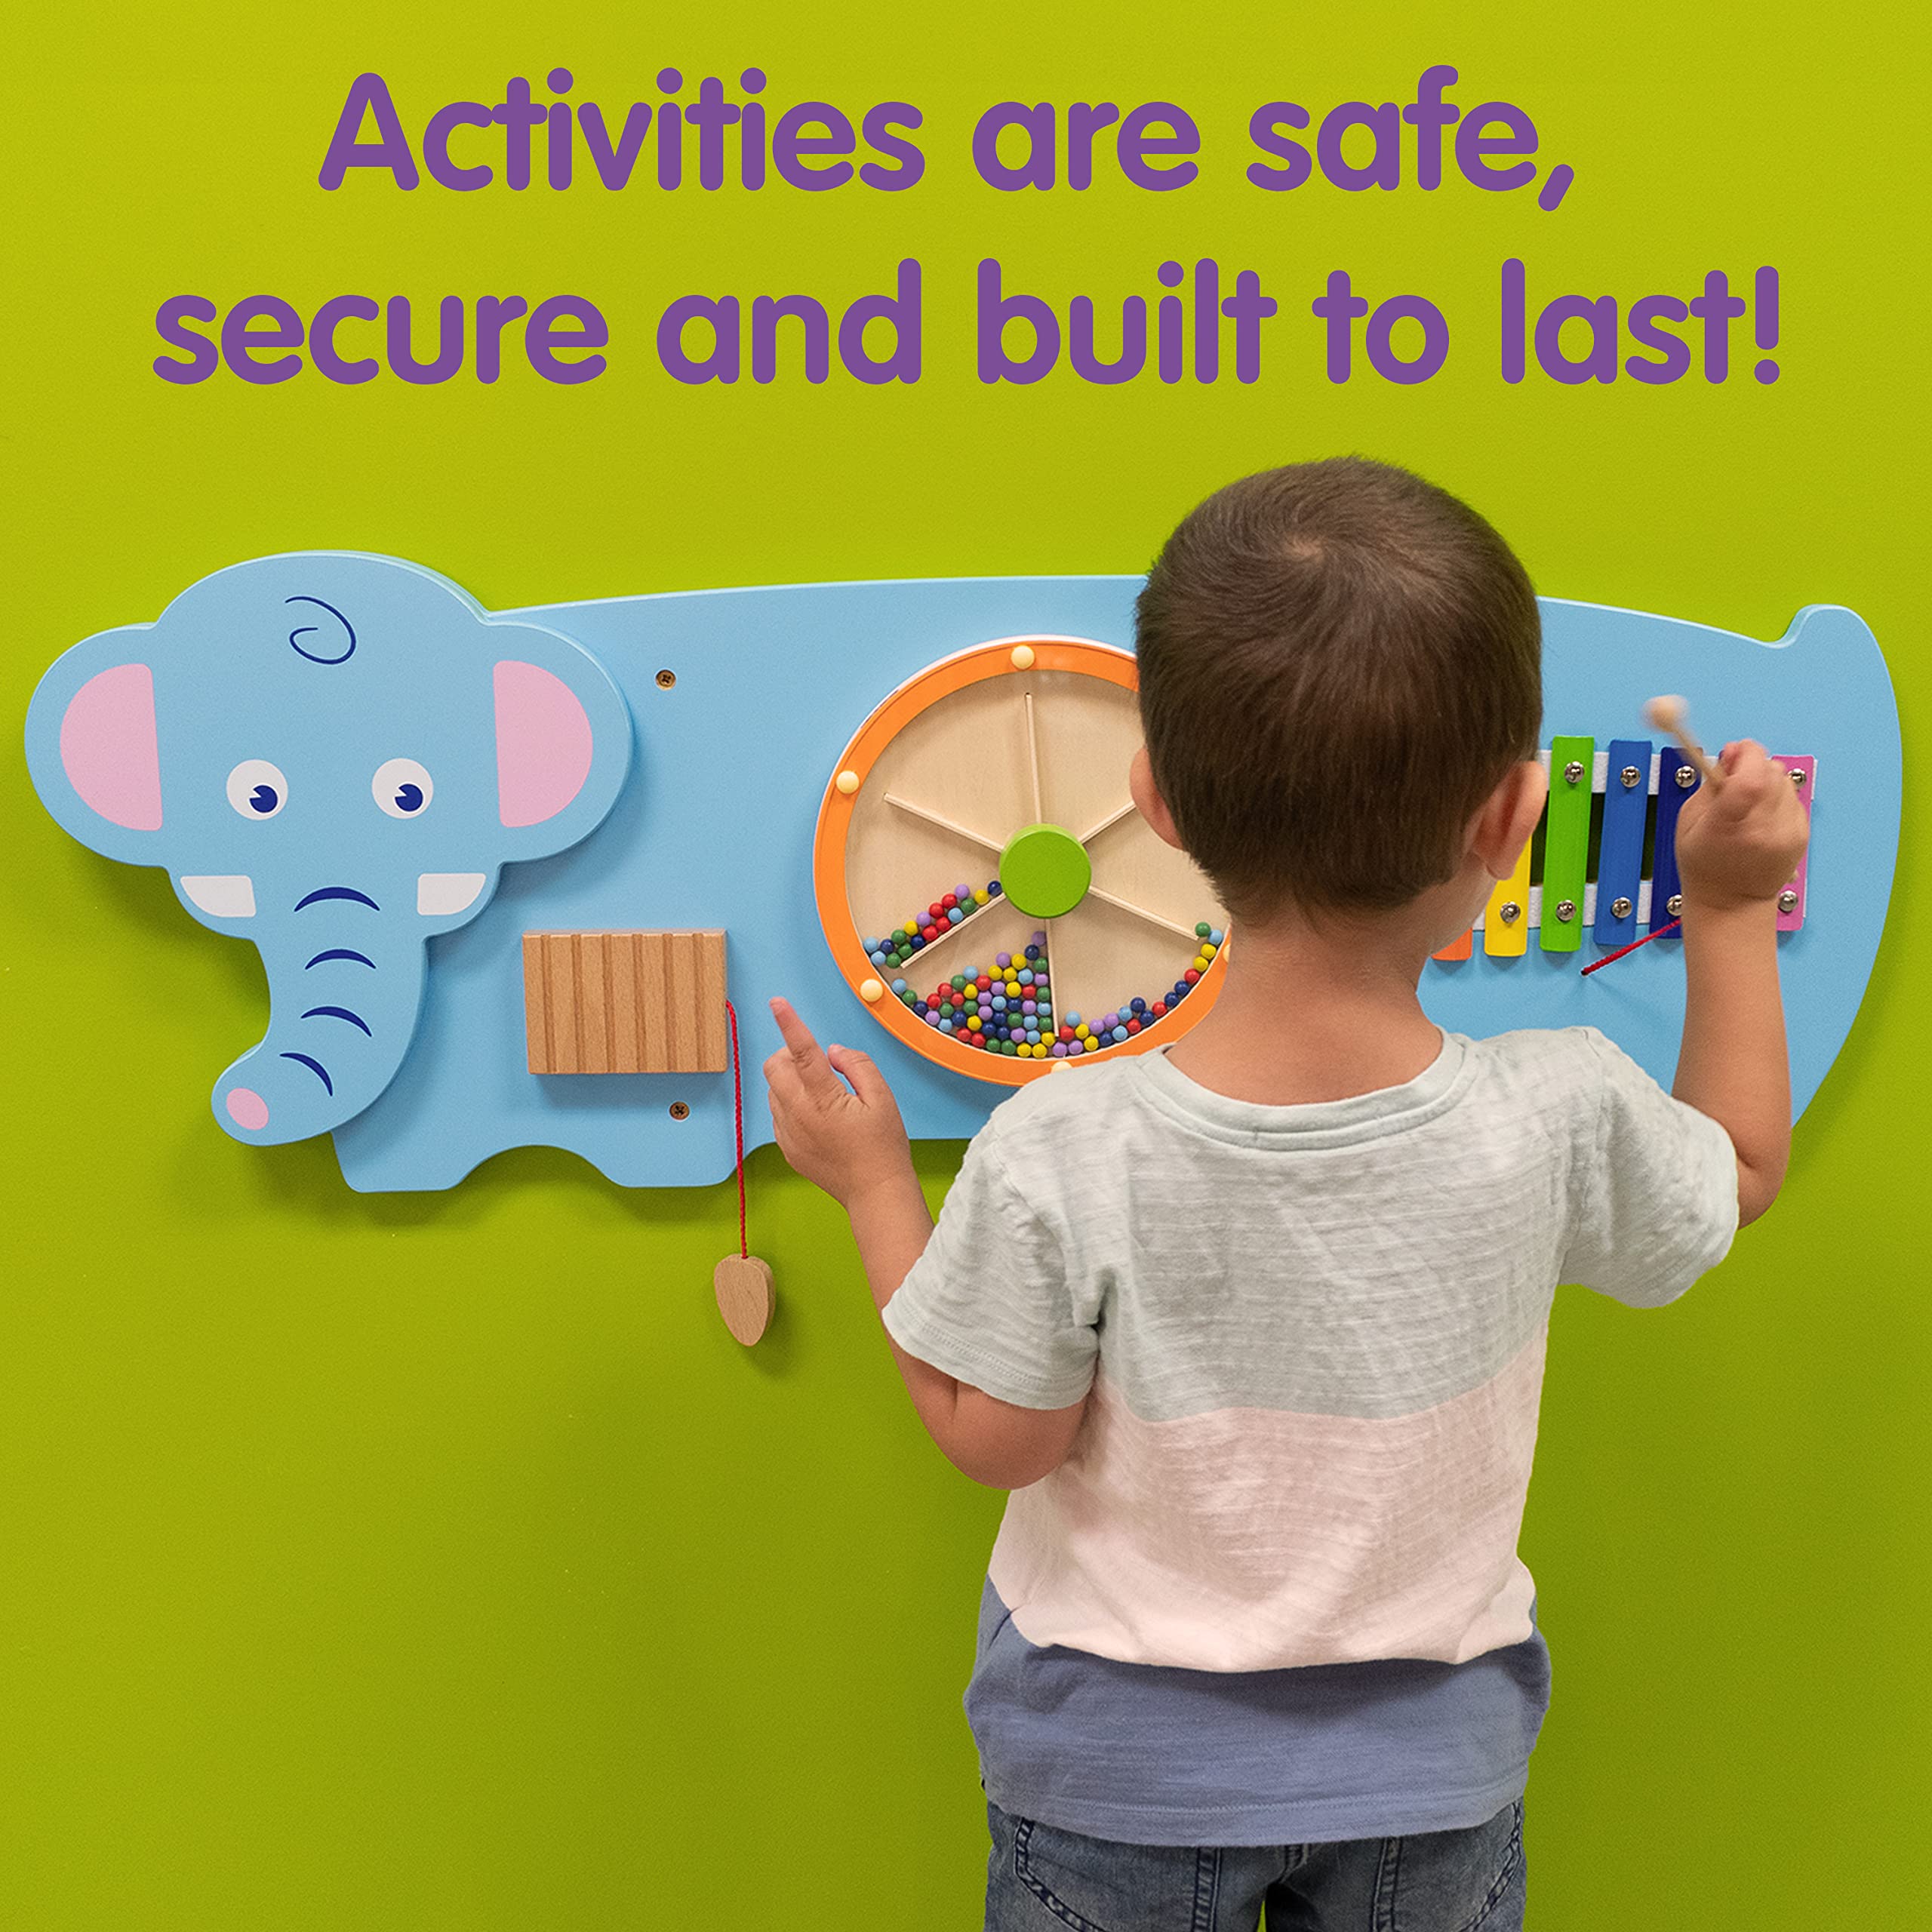 SPARK & WOW Elephant Activity Wall Panel - 18m+ - Toddler Activity Center - Wall-Mounted Toy - Busy Board Decor for Bedrooms, Daycares and Play Areas